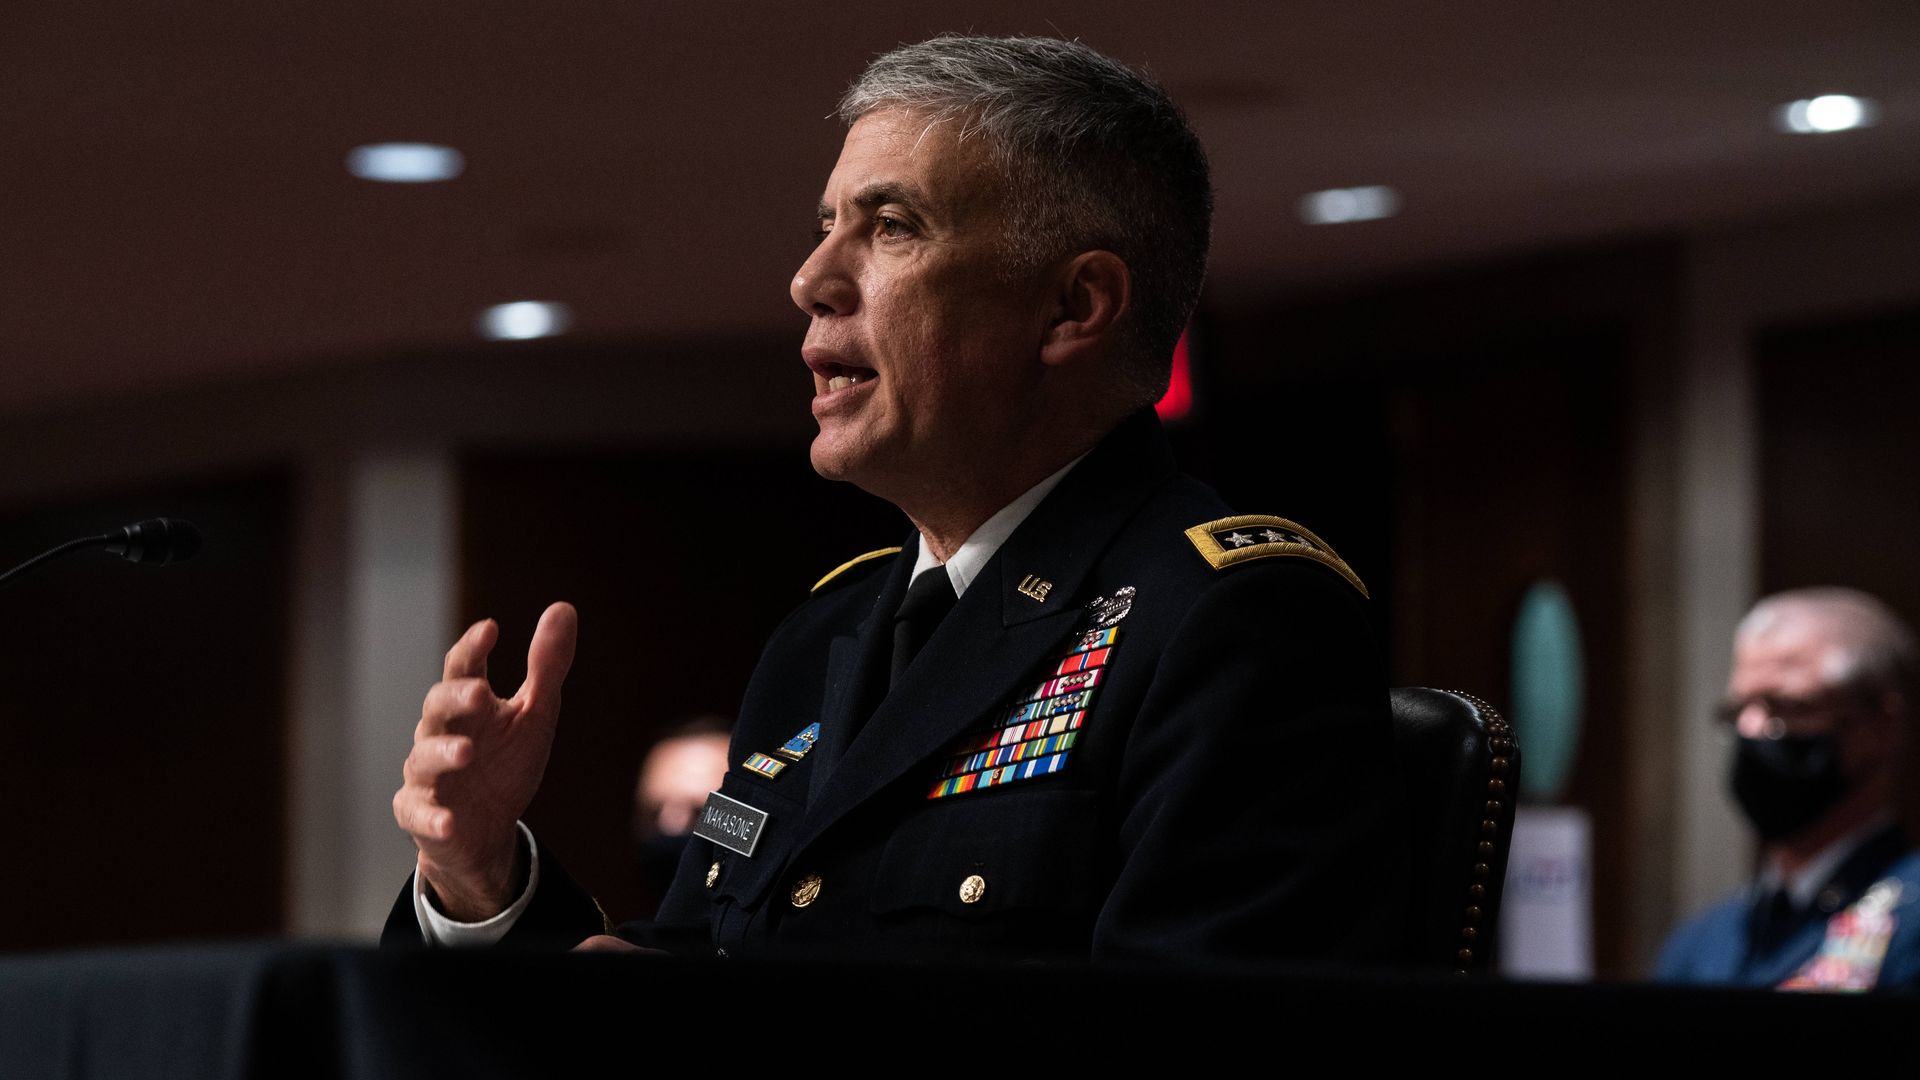 Gen. Paul Nakasone, commander of the U.S. Cyber Command, speaking before the Senate Armed Services Committee on March 25.